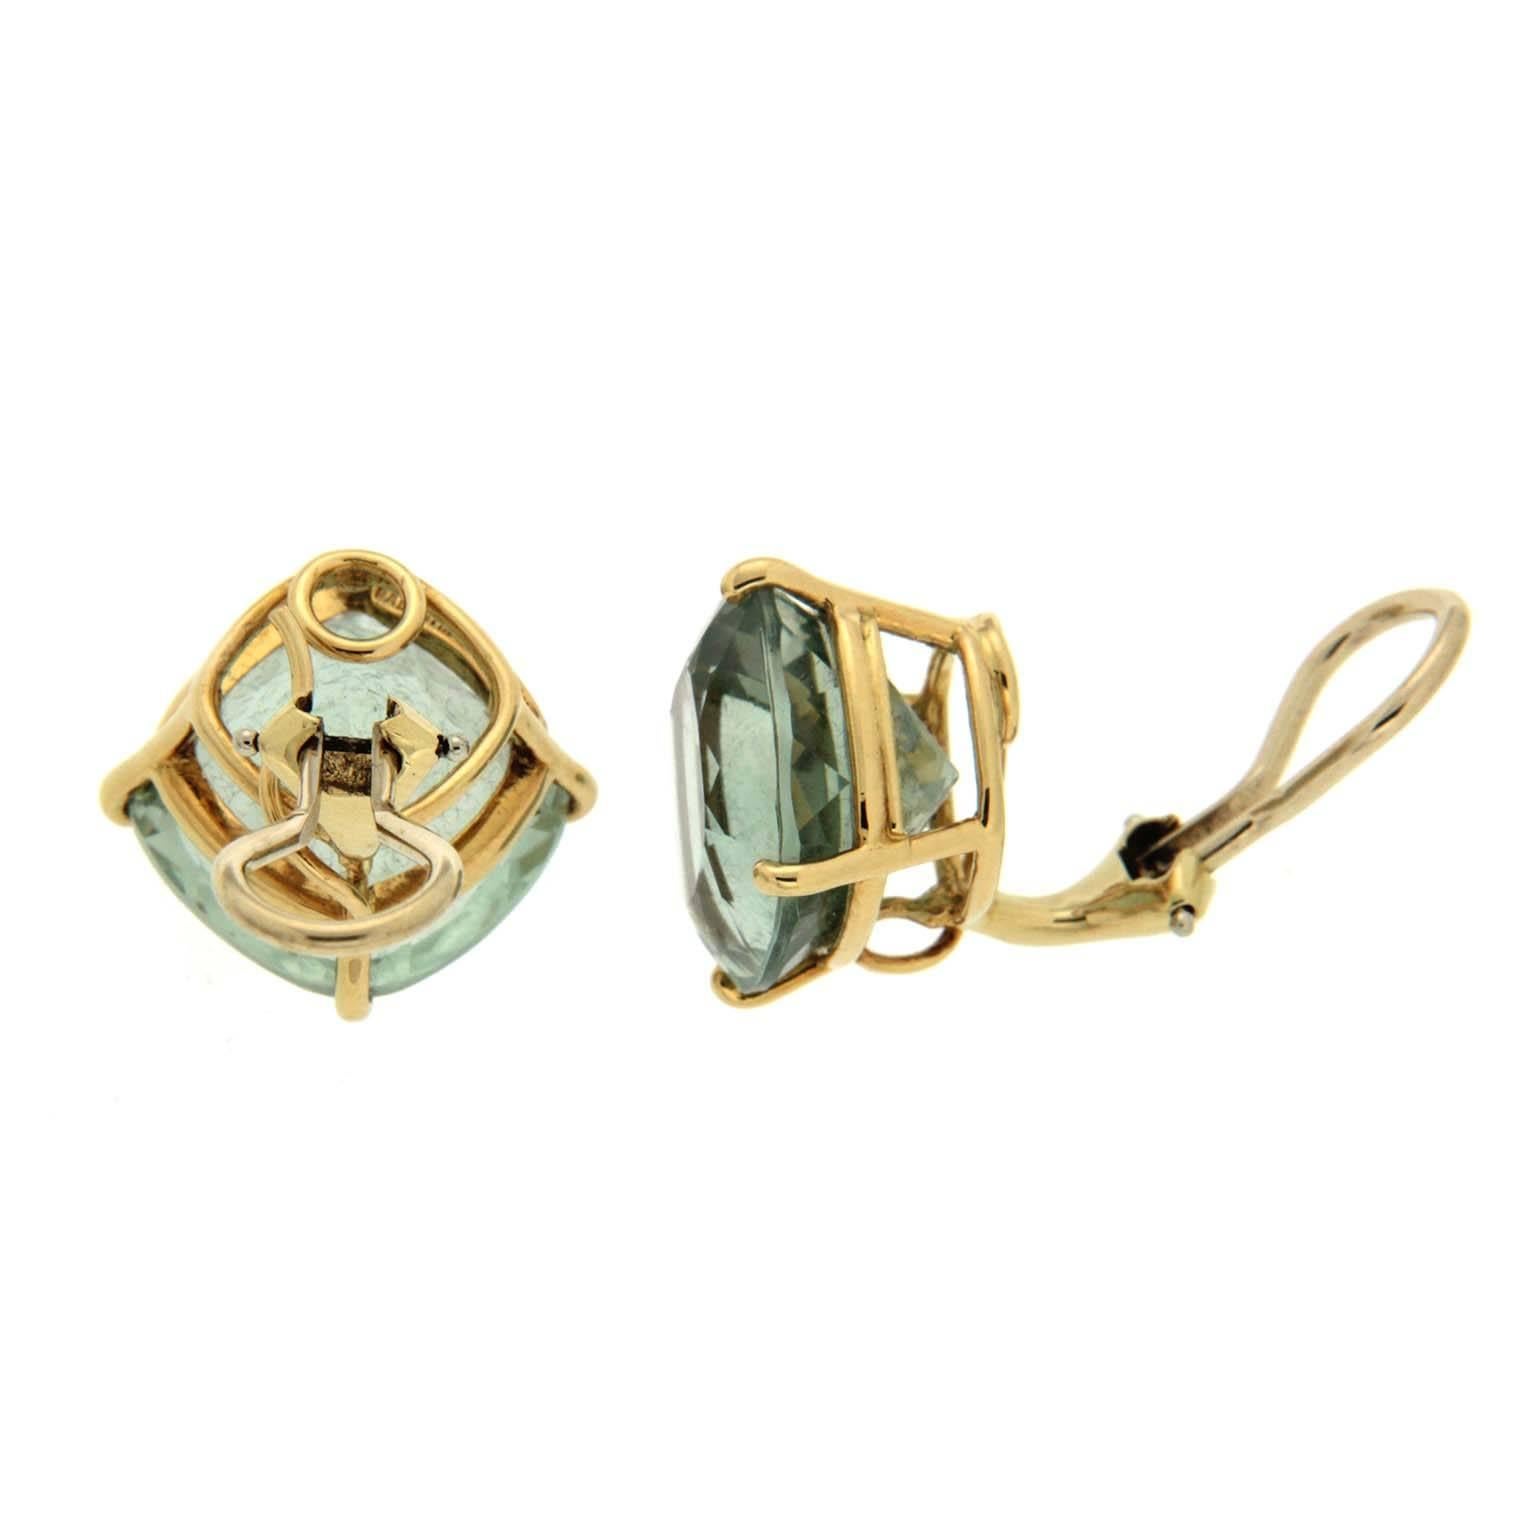 Prasiolite gives these earrings its bluish green hues. The jewels are cushion cut and set on four prongs so they balance on a corner. Both the settings and clip backs are 18k yellow gold. The jewels weigh a combined 25.3 carats.

Measurement detail